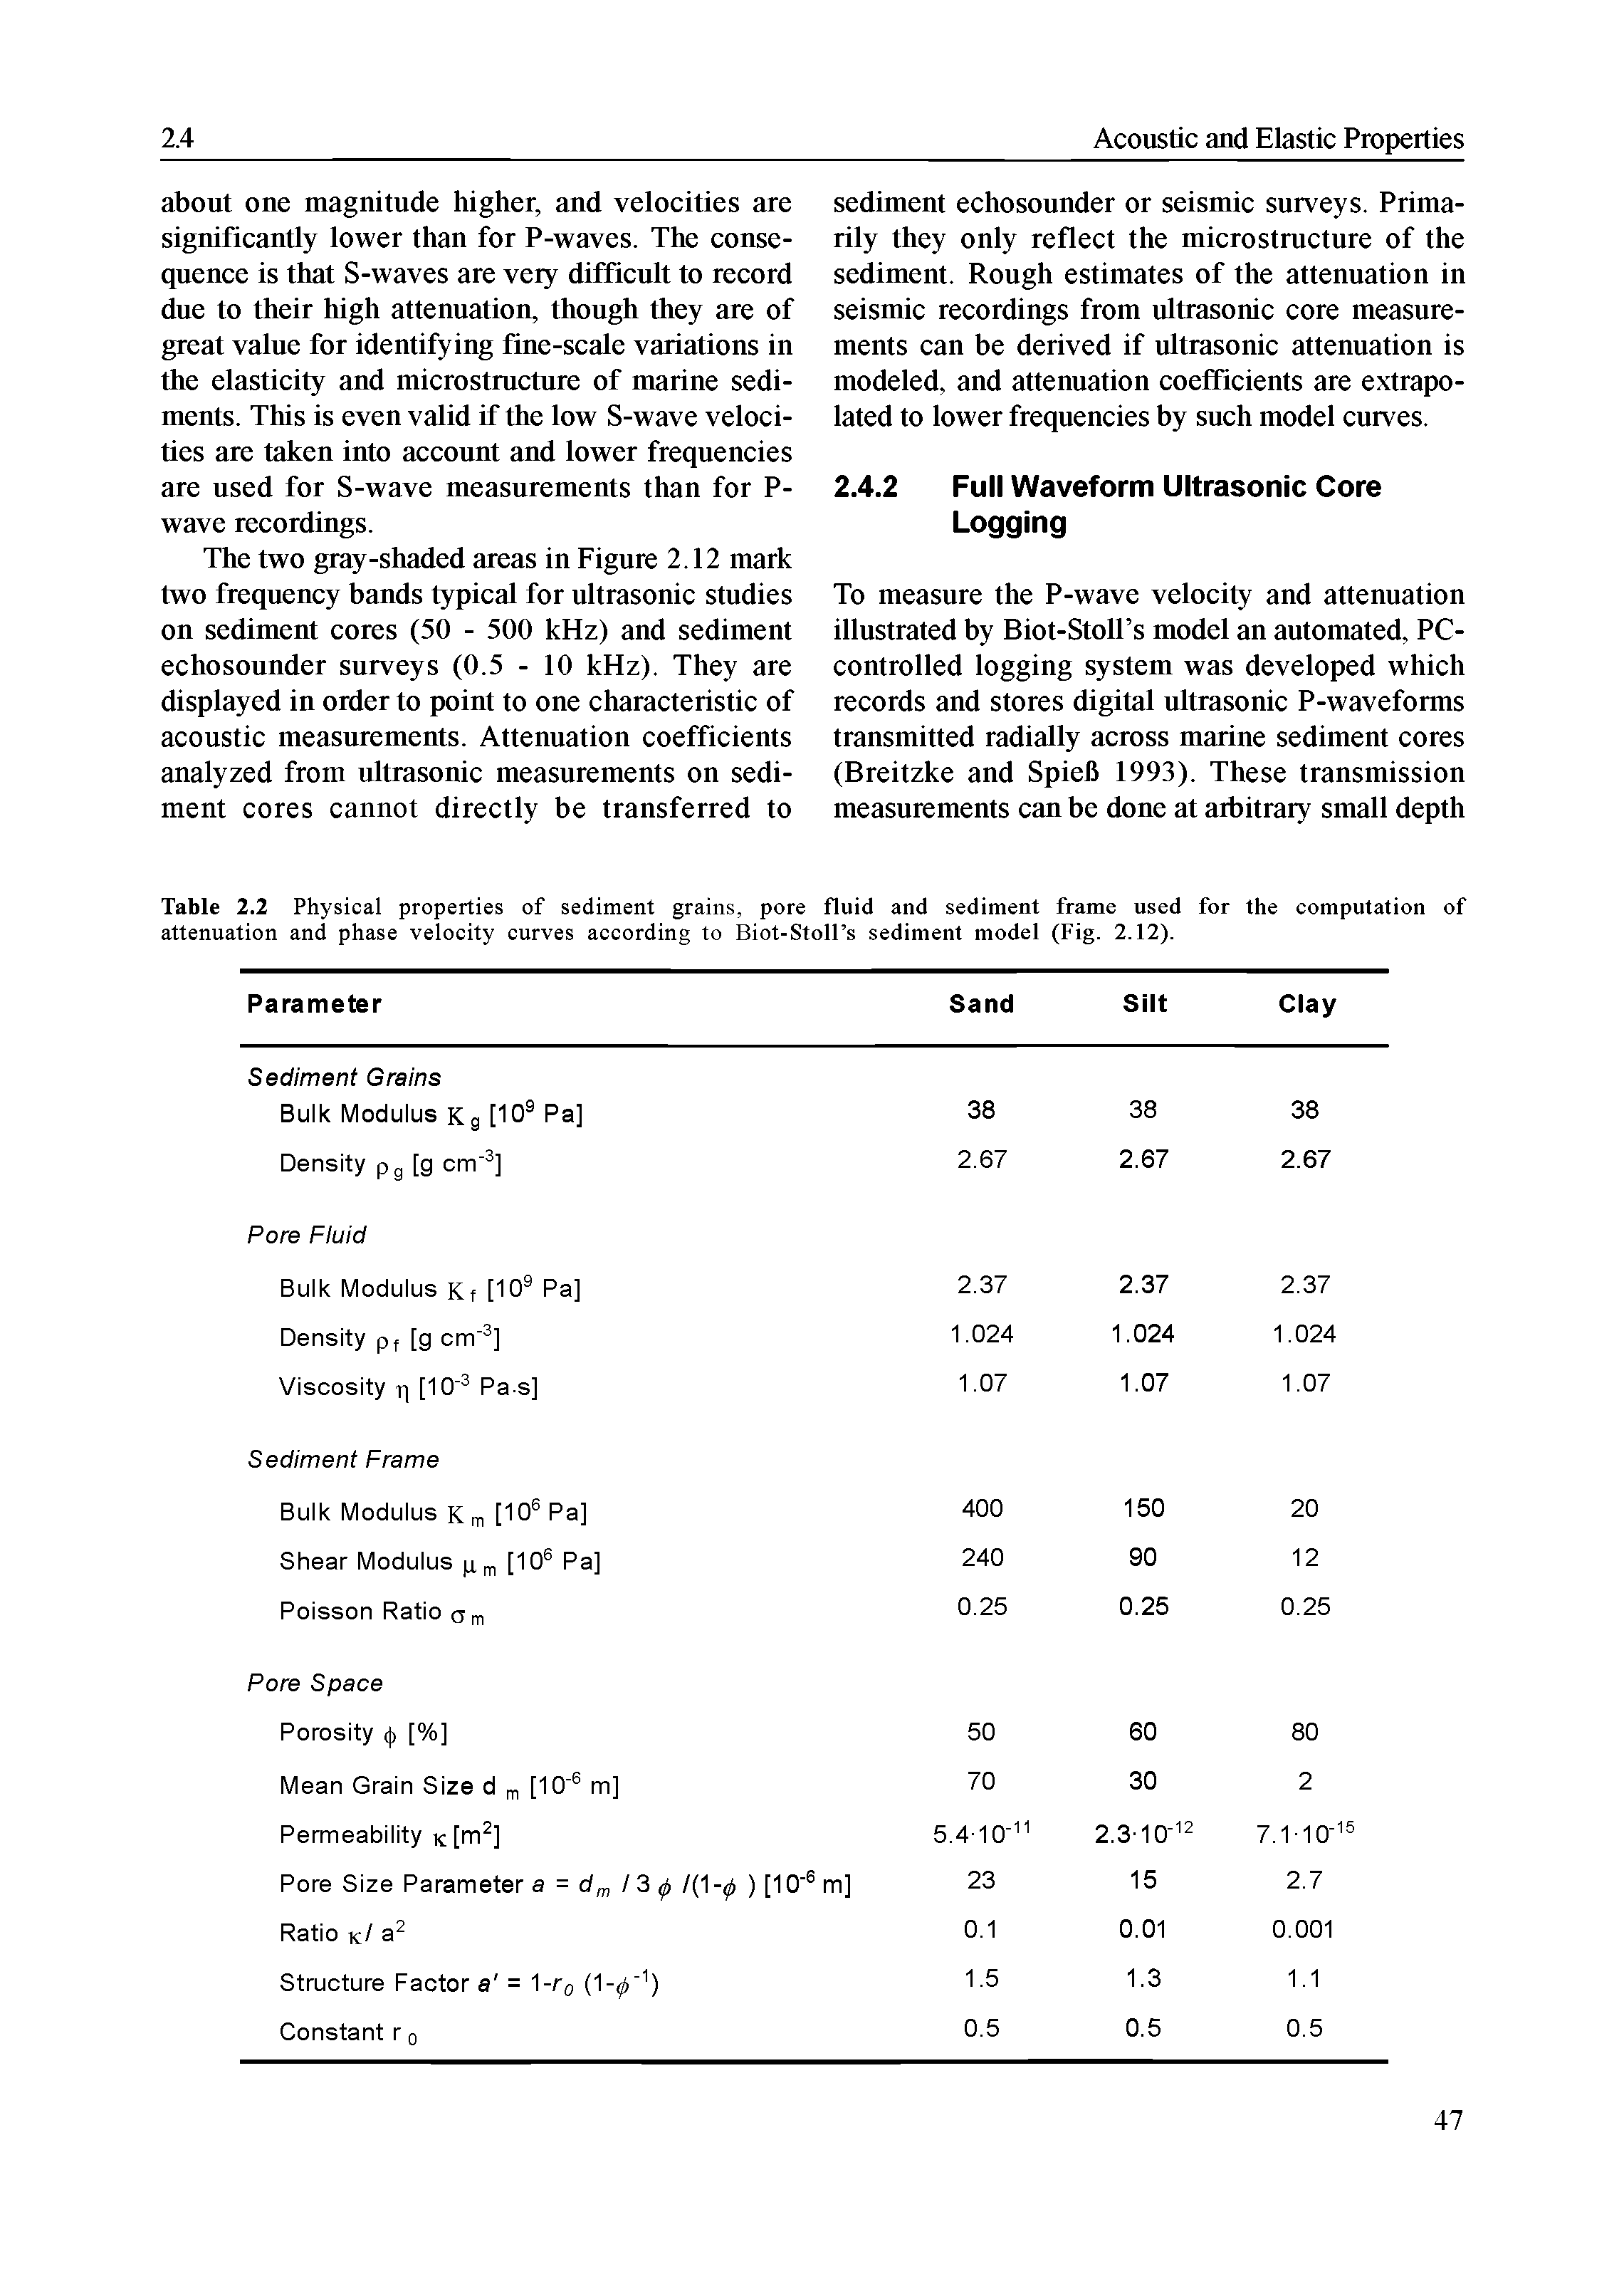 Table 2.2 Physical properties of sediment grains, pore fluid and sediment frame used for the computation of attenuation and phase velocity curves according to Biot-Stoll s sediment model (Fig. 2.12).